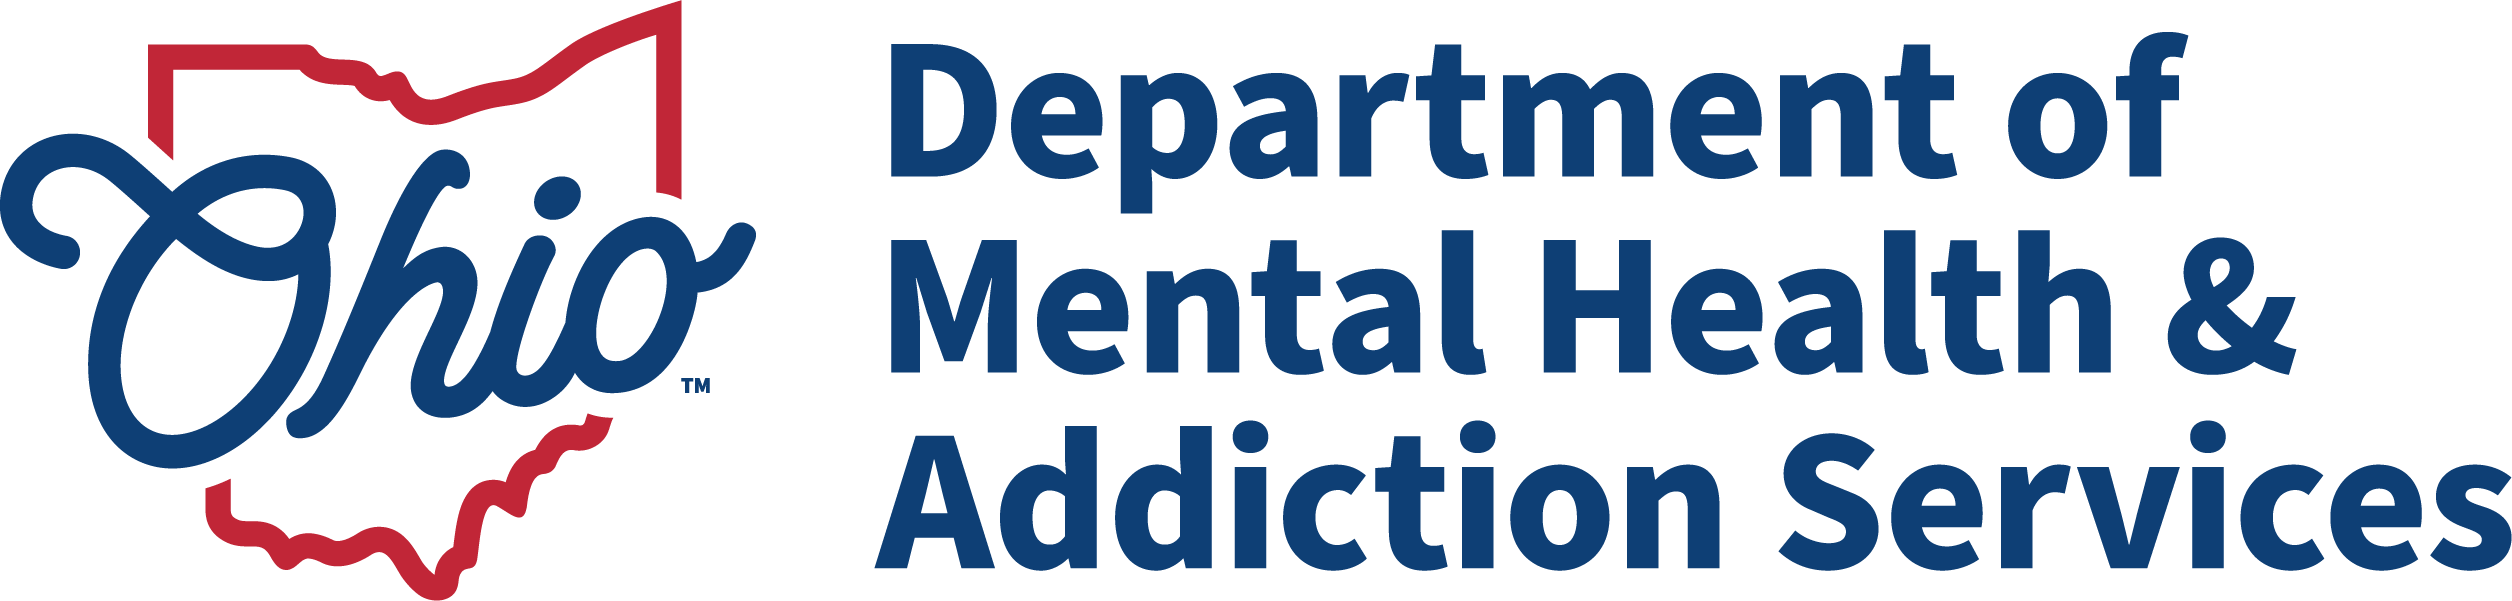 ohio department of mental health and addiction services logo